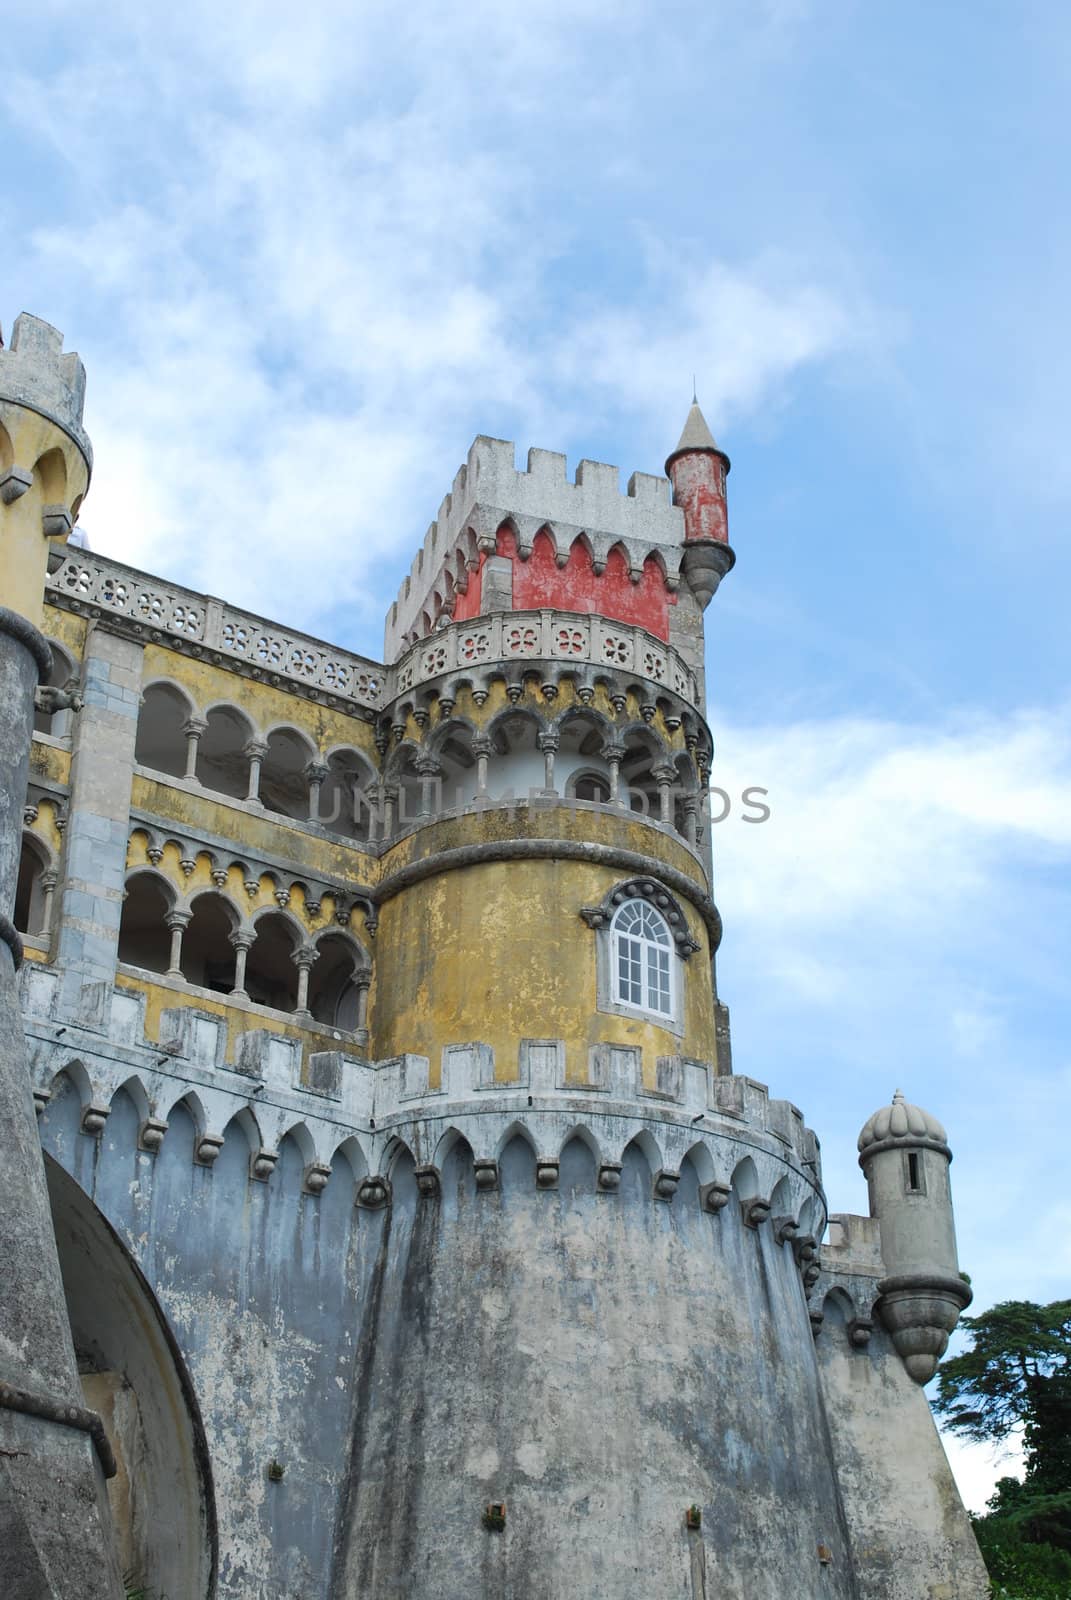 National Palace of Pena in Sintra, Portugal by luissantos84